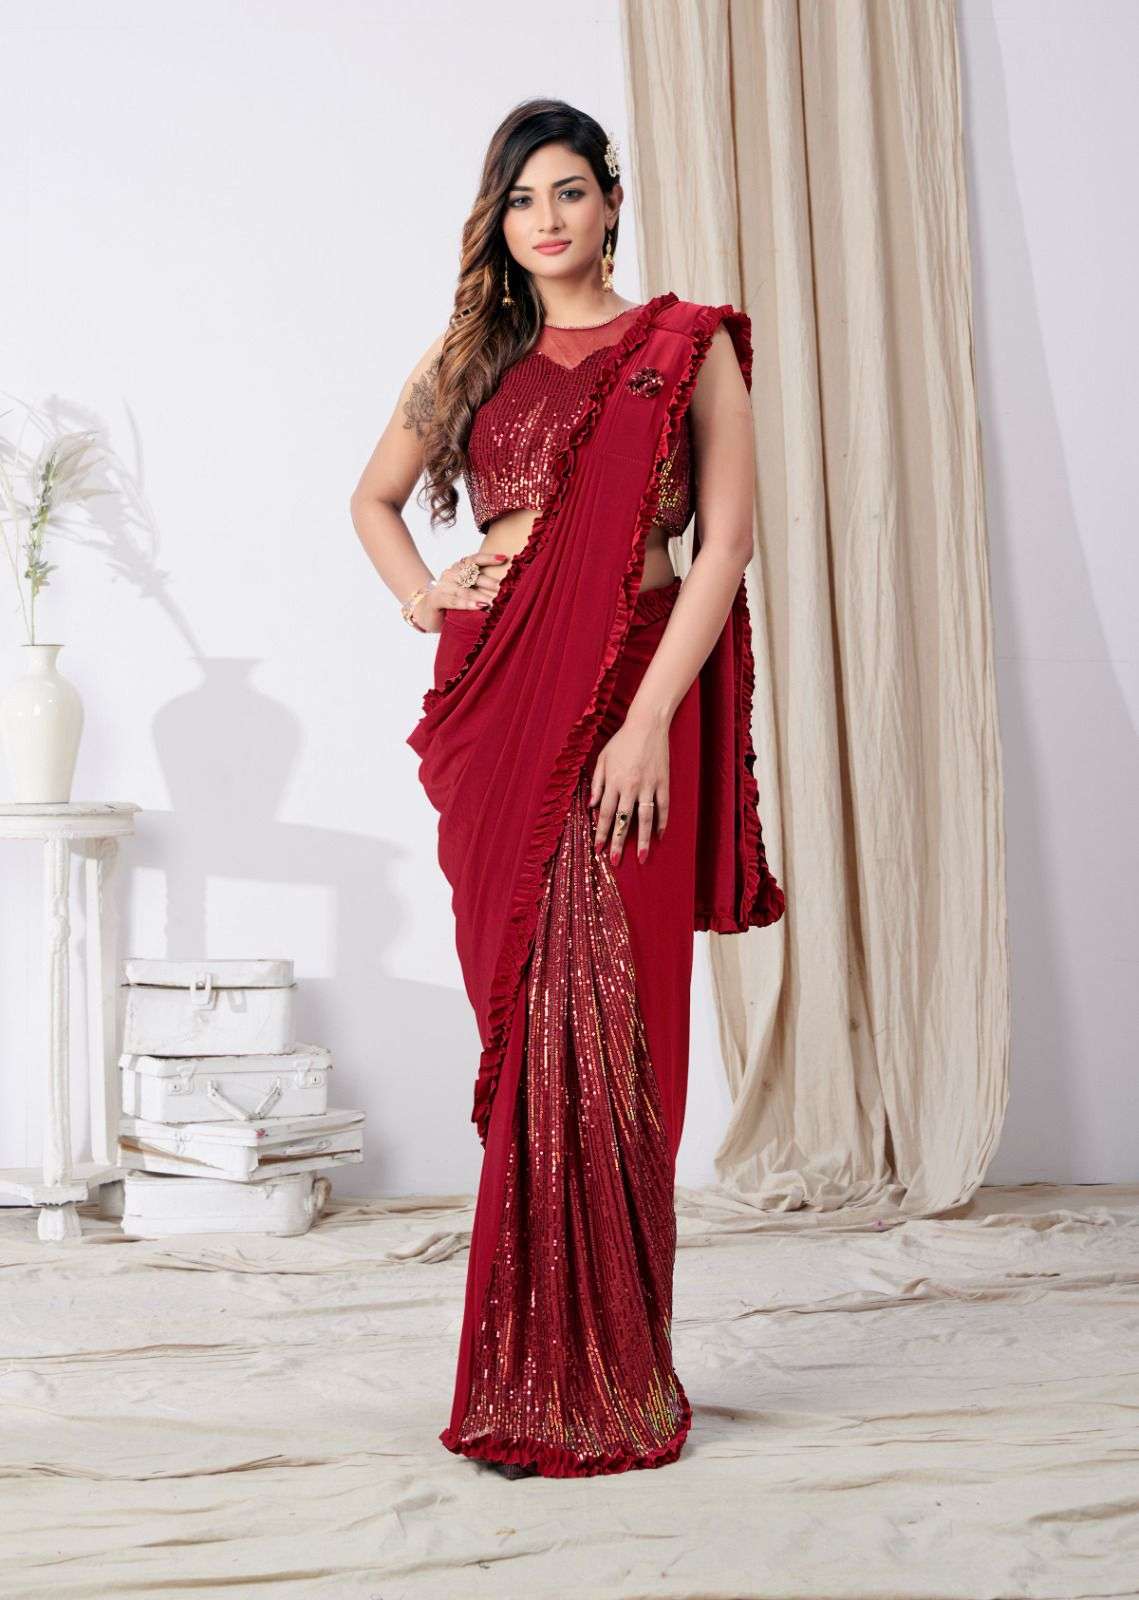 readymade saree design number 101790 saree imported fabric with sequnce work in plates ready to wear saree 